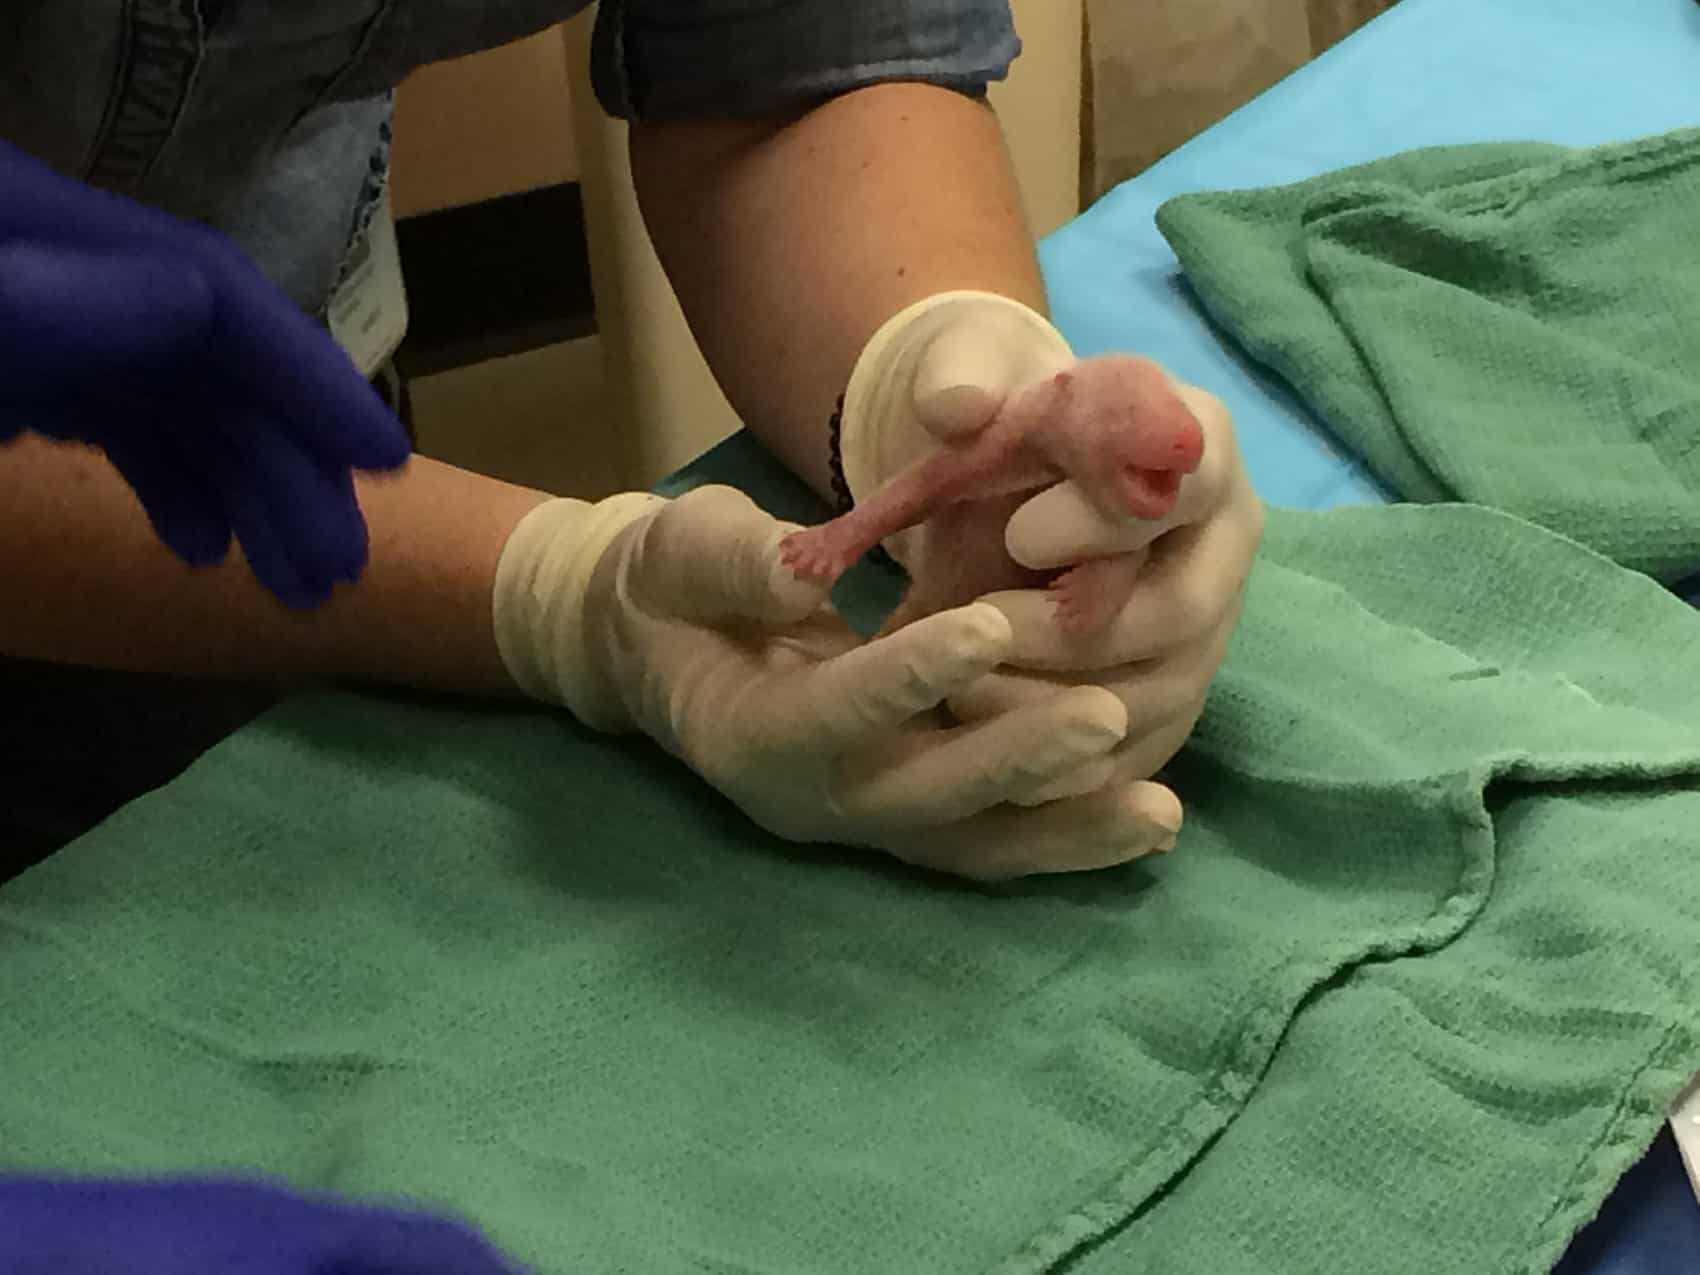 The second giant panda cub born to Mei Xiang at the Smithsonian National Zoo on Saturday, Aug. 22